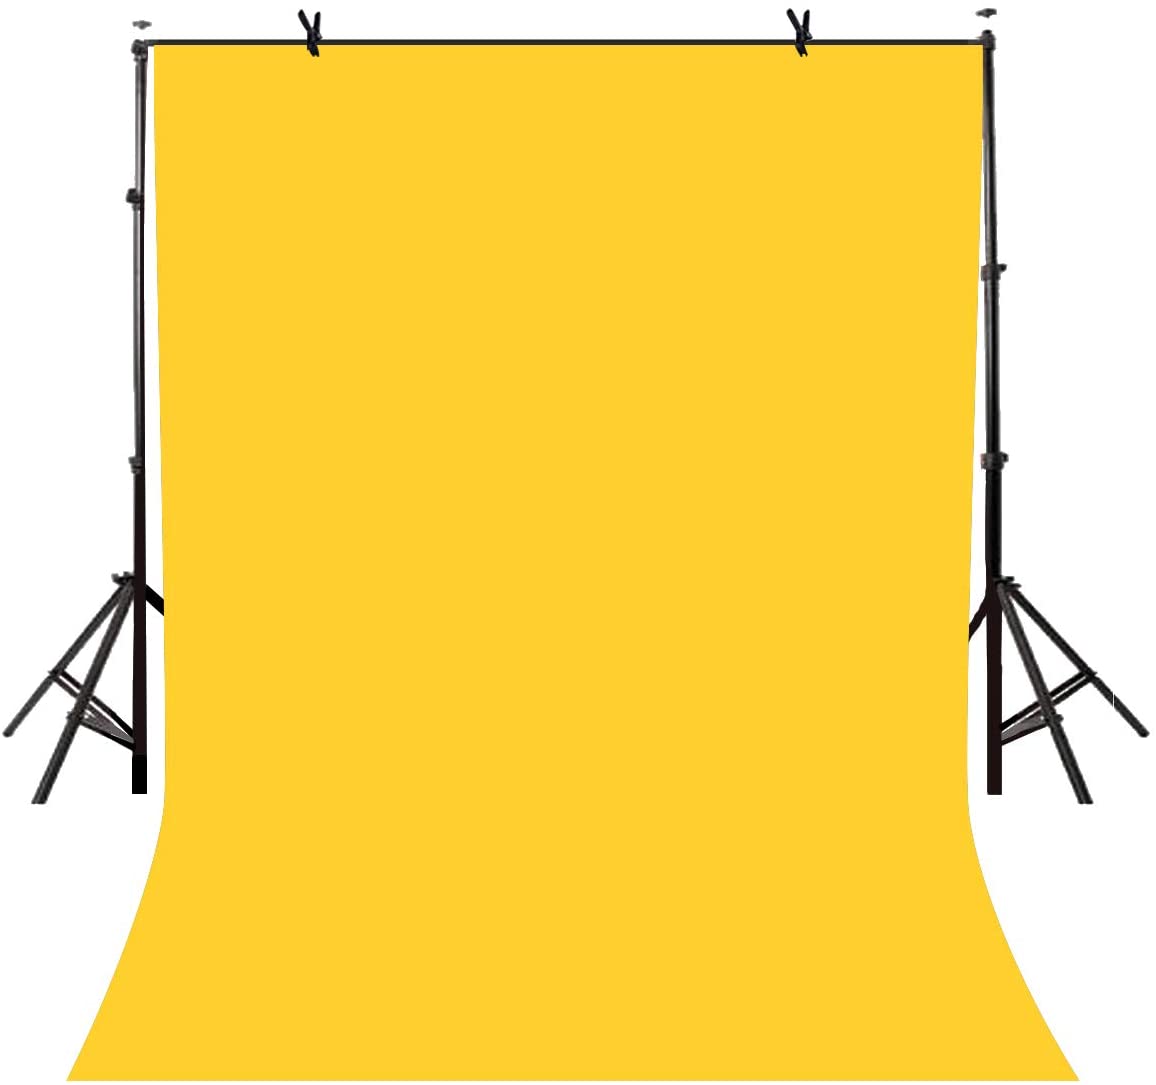 Lycra Wrinkle Resistant Yellow Screen Photography Background Cloth for Photoshoot Portrait Video Shooting (8x12 ft) (Yellow)